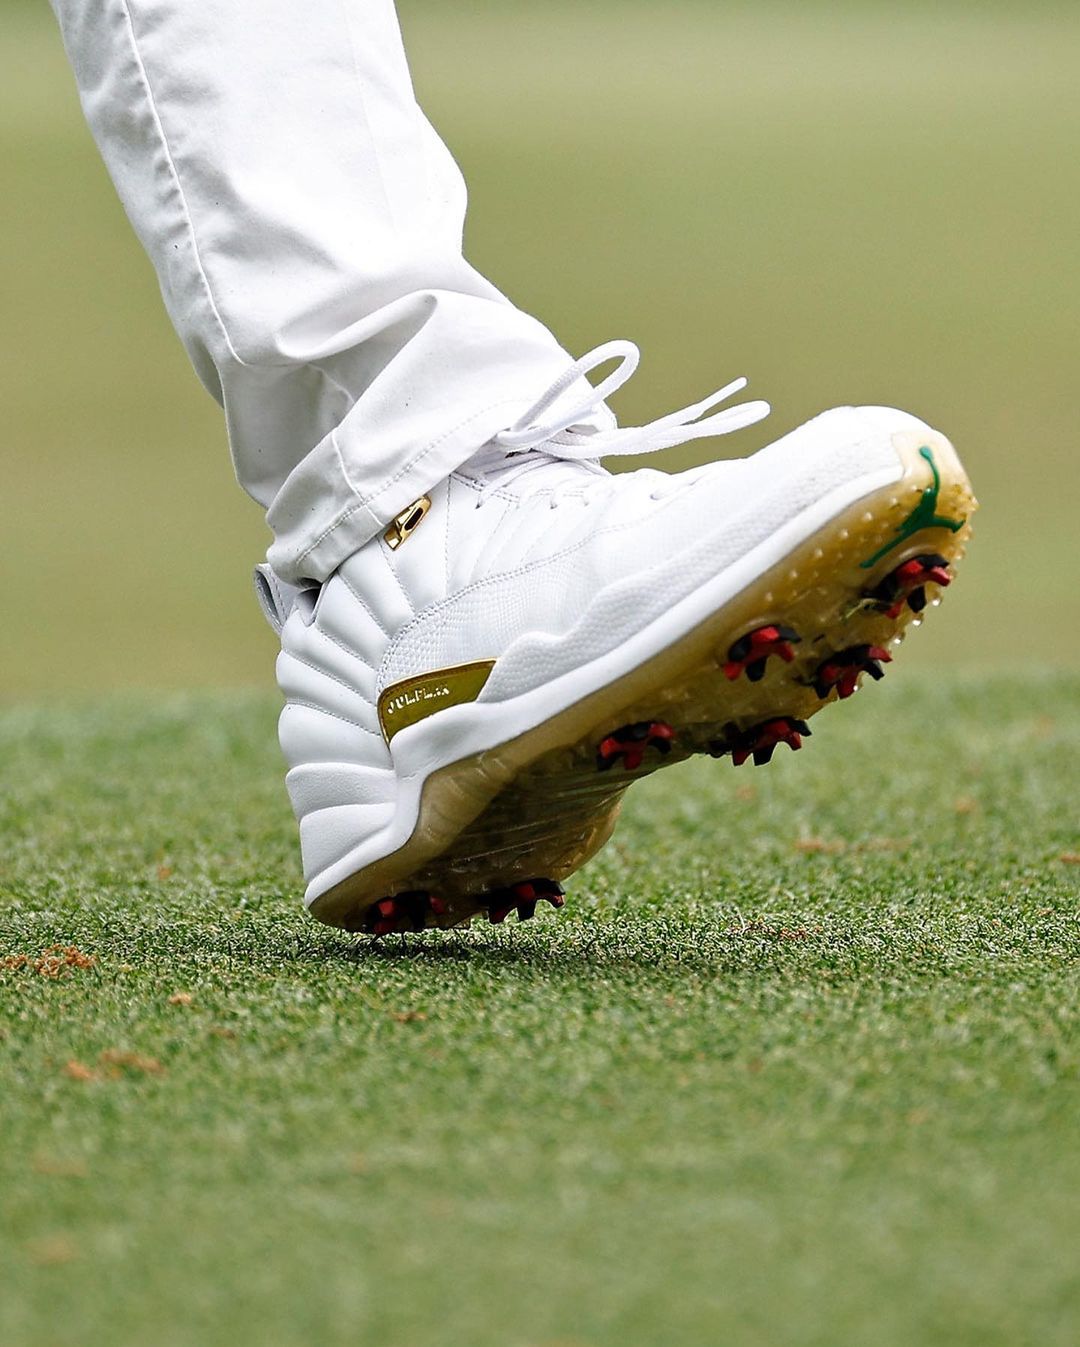 Spotted: HV3 is rocking these new Jordan golf shoes – GolfWRX